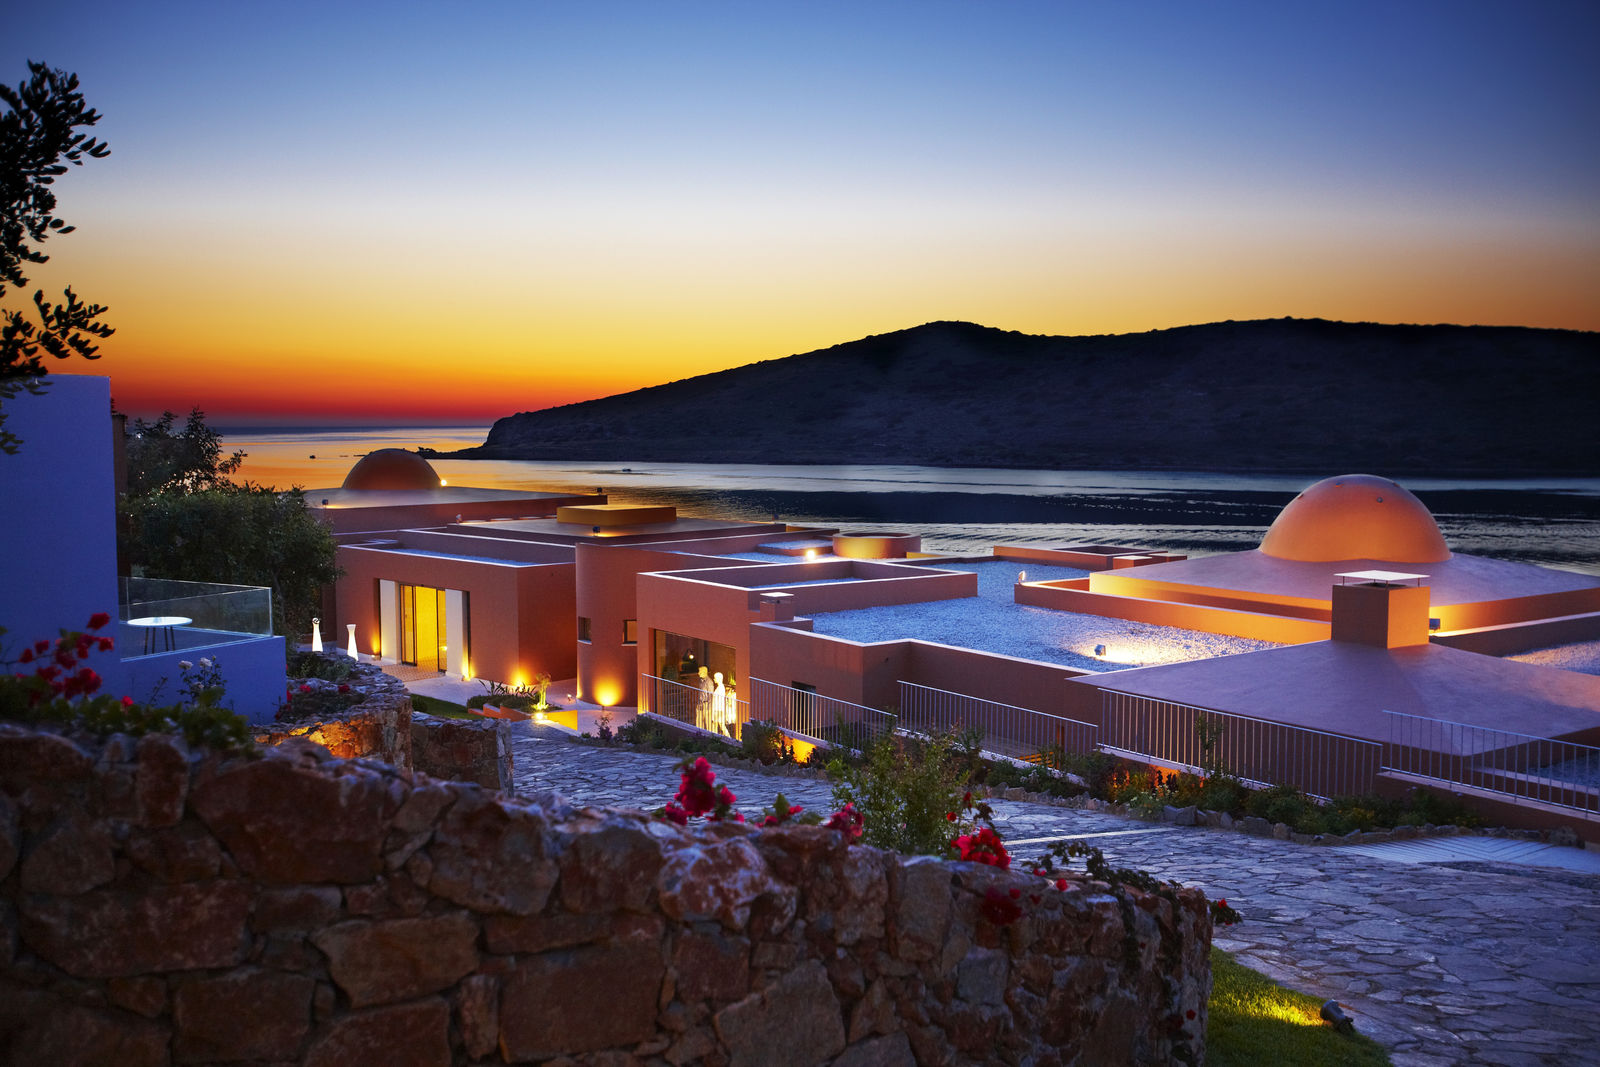 Extended season in Crete: Domes Zeen Chania, Domes Noruz Chania and Domes of Elounda welcome you until November 1st